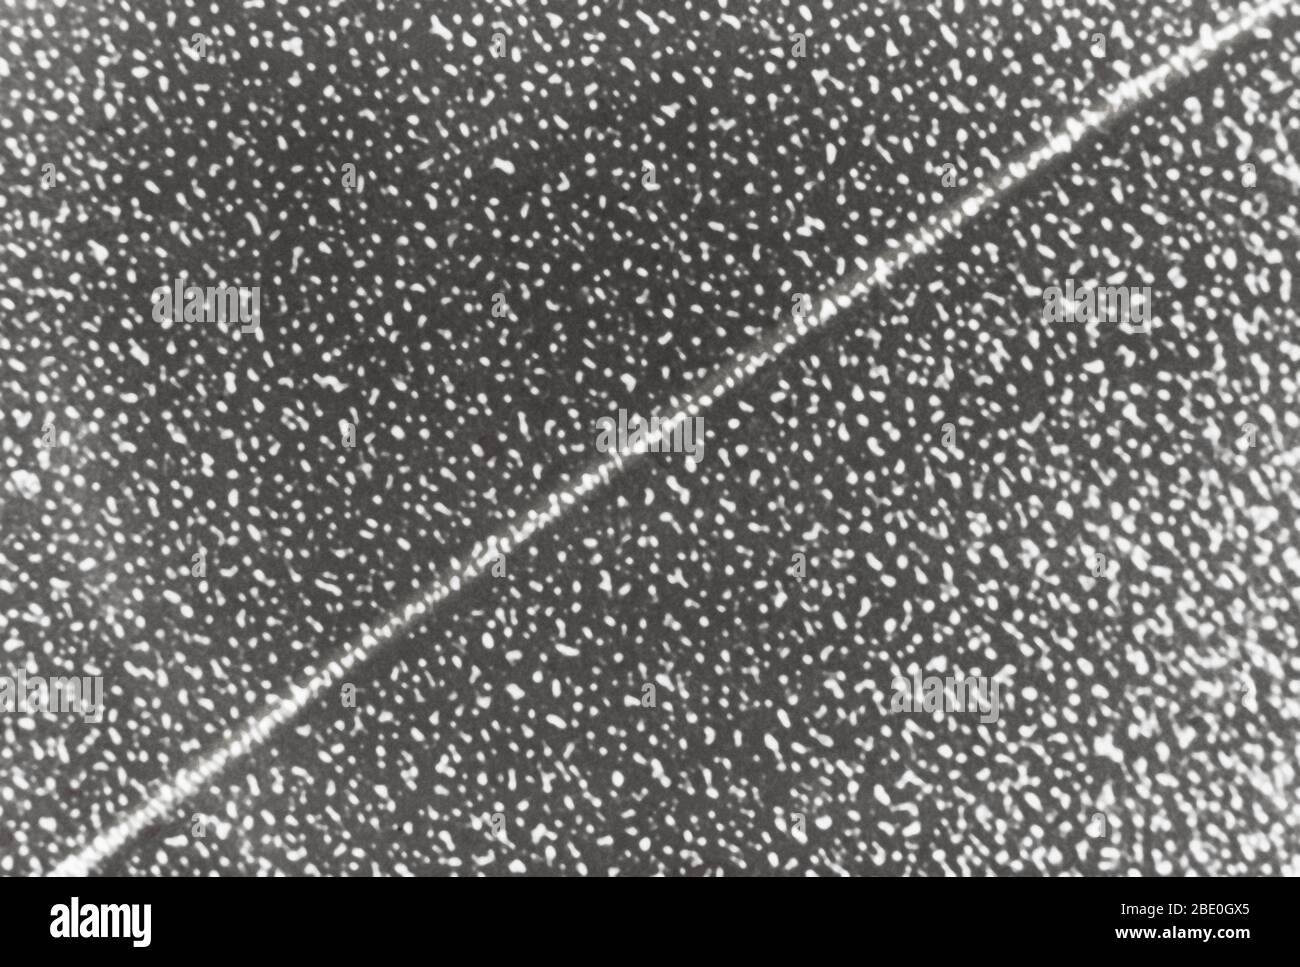 Transmission electron micrograph (TEM) of a single strand of DNA. Deoxyribonucleic acid (DNA) is a molecule that carries the genetic instructions used in the growth, development, functioning and reproduction of all known living organisms and many viruses. DNA and ribonucleic acid (RNA) are nucleic acids; alongside proteins, lipids and complex carbohydrates (polysaccharides), they are one of the four major types of macromolecules that are essential for all known forms of life. Most DNA molecules consist of two biopolymer strands coiled around each other to form a double helix. Magnification: un Stock Photo